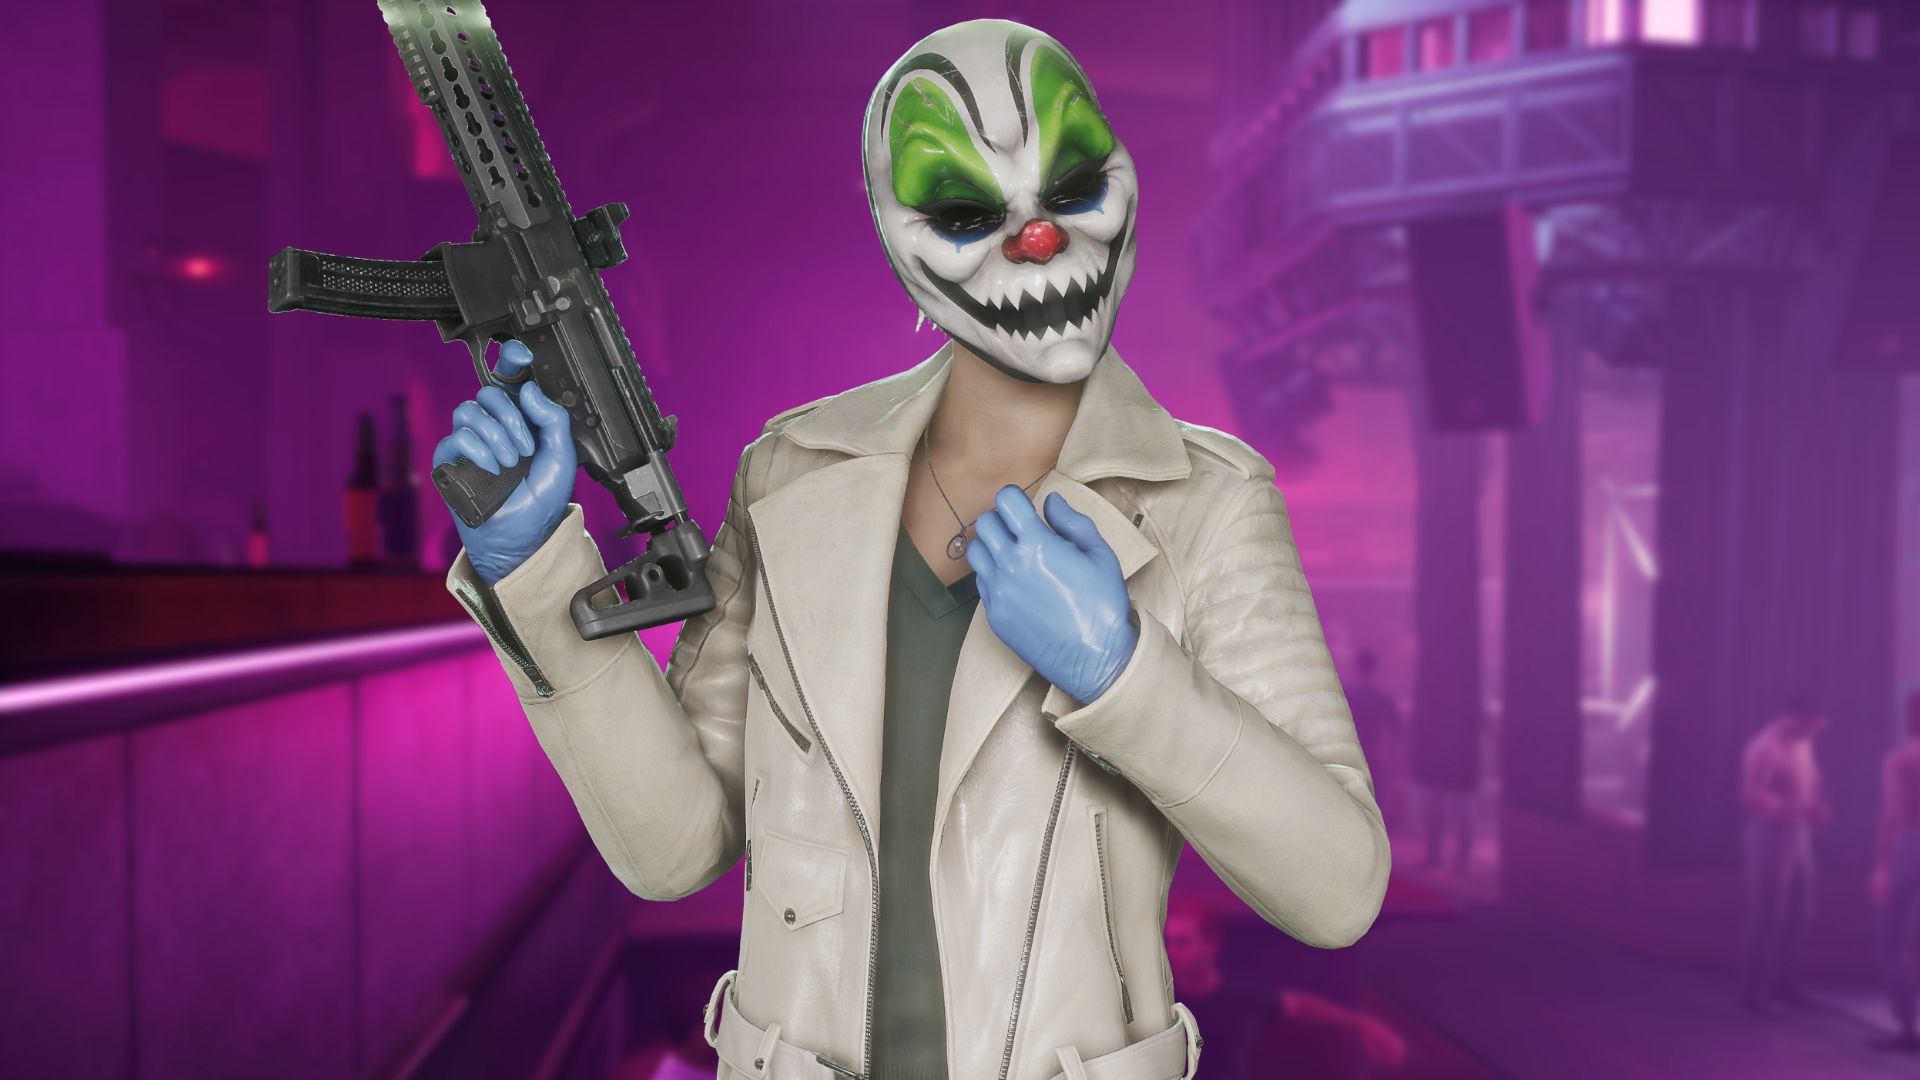 Struggling with Payday 3 Matchmaking? Try This Fix for Server